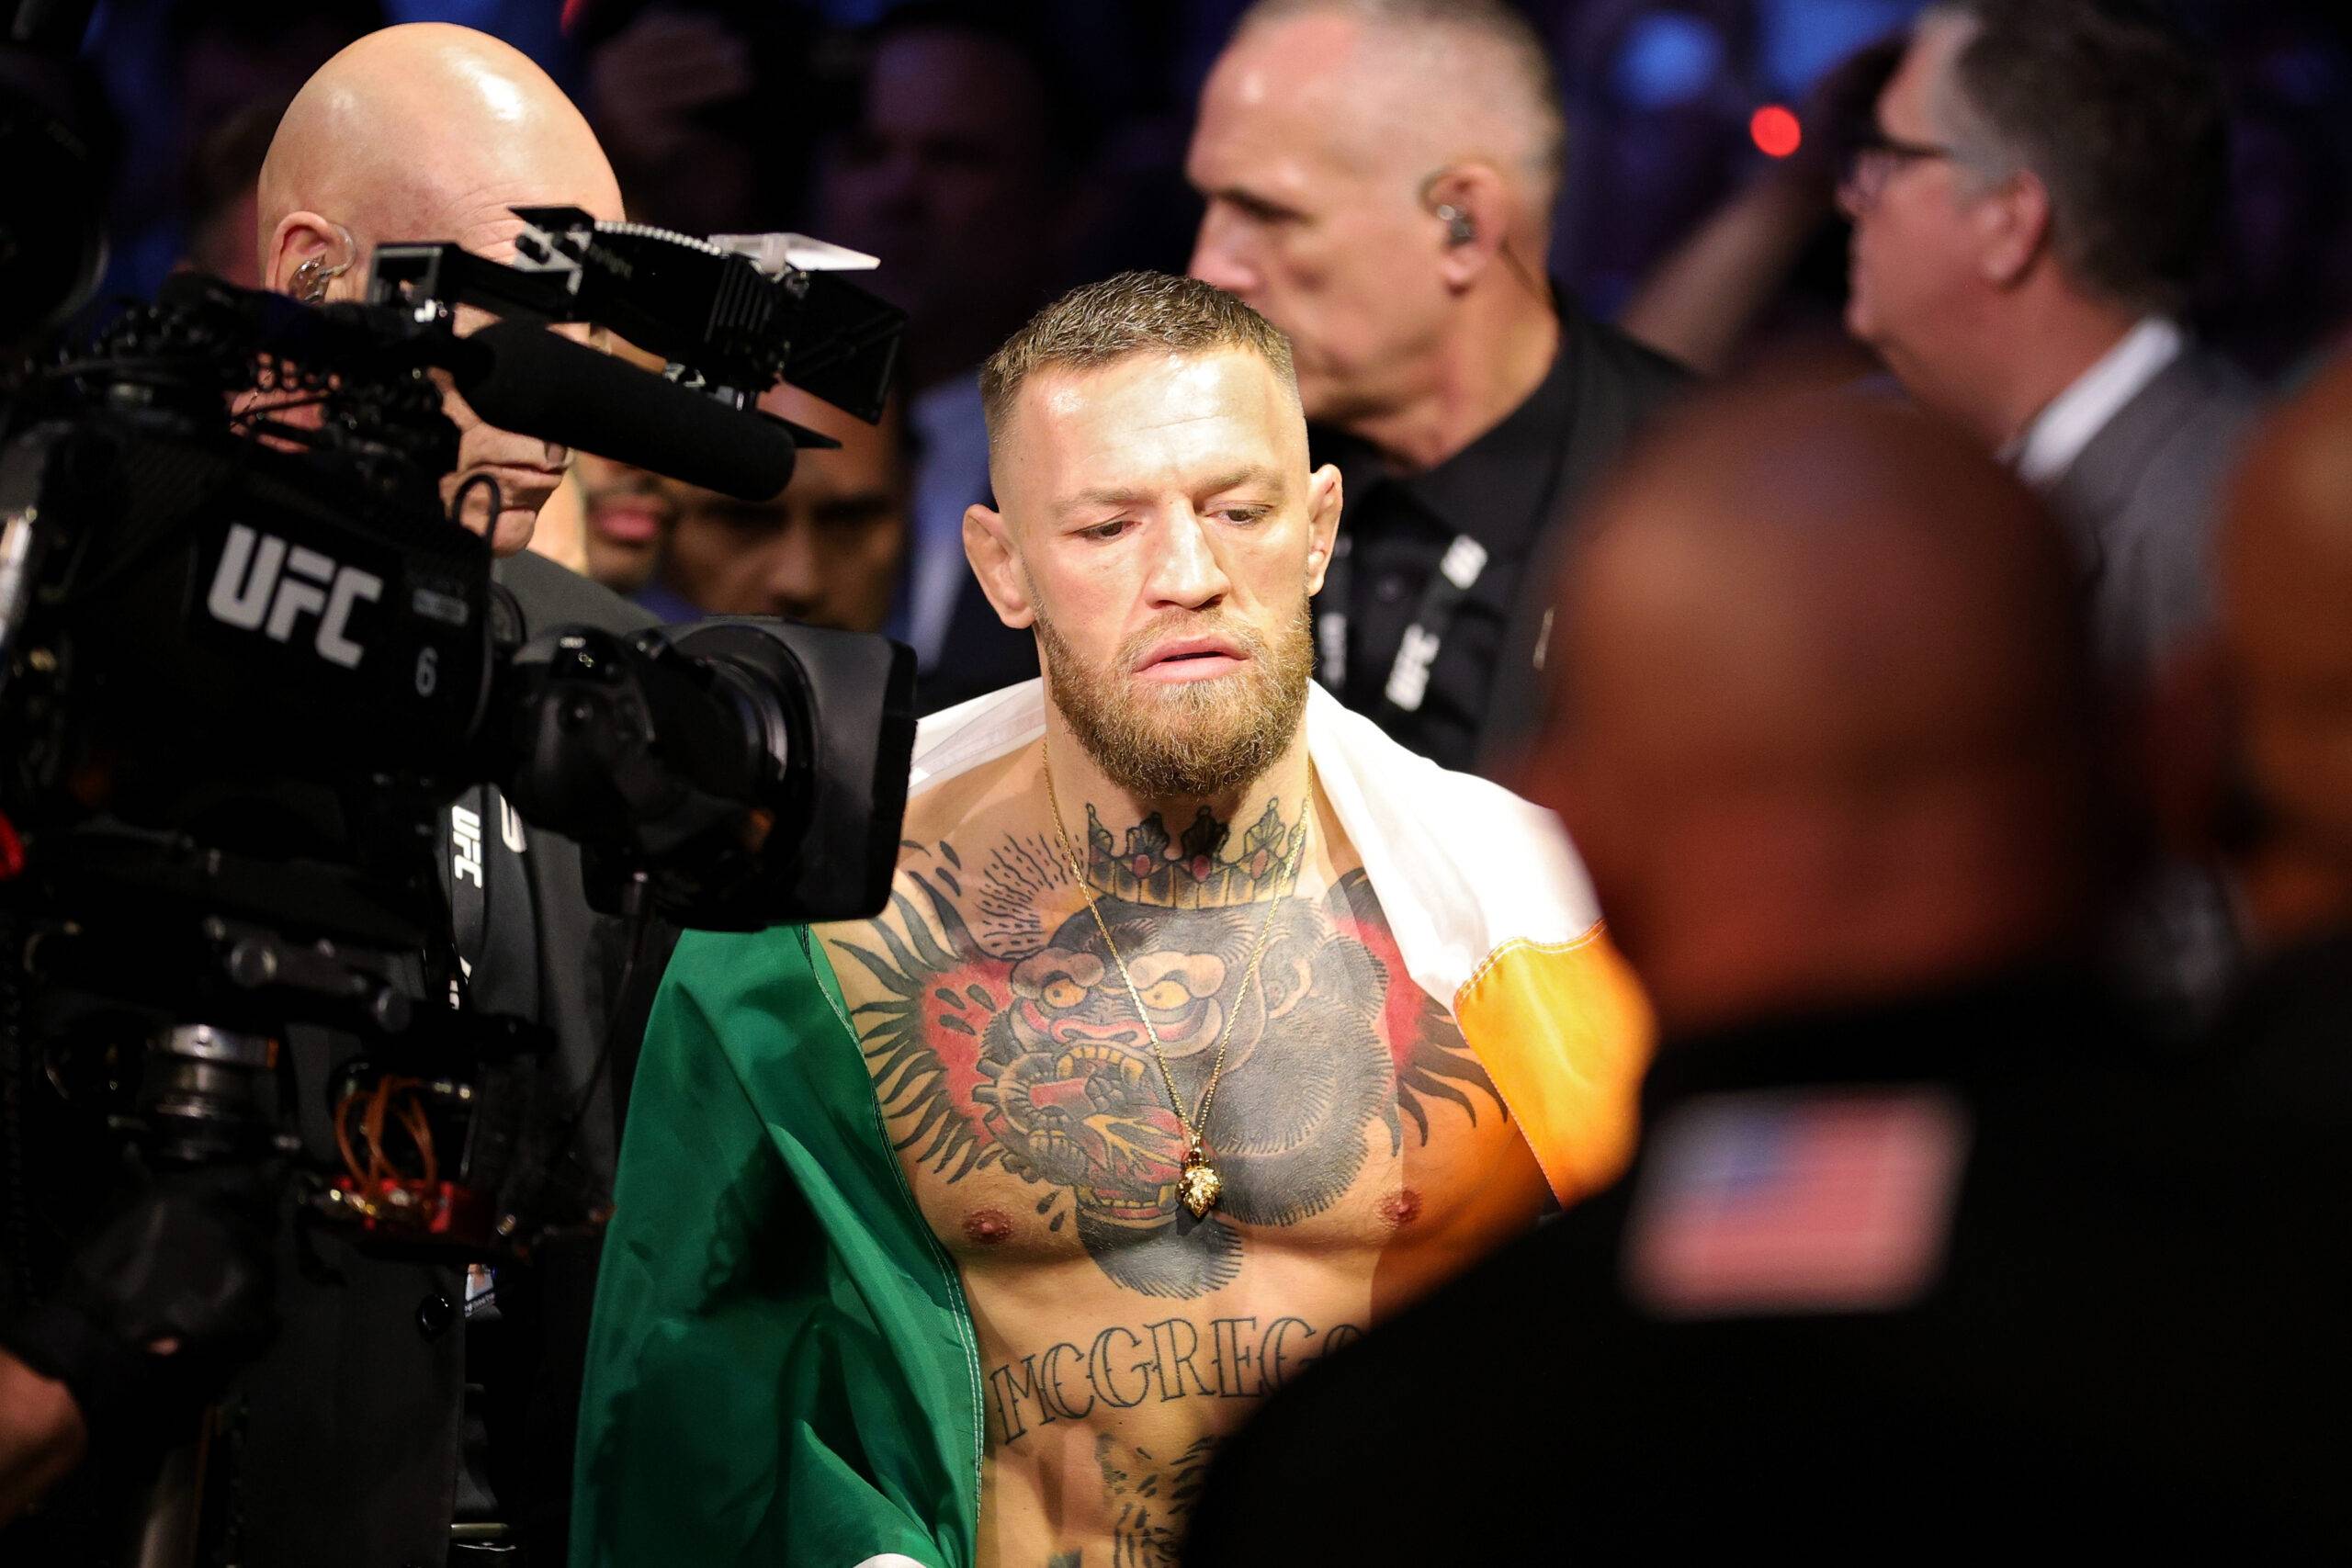 Conor McGregor's long-term future in the UFC has been cast in doubt